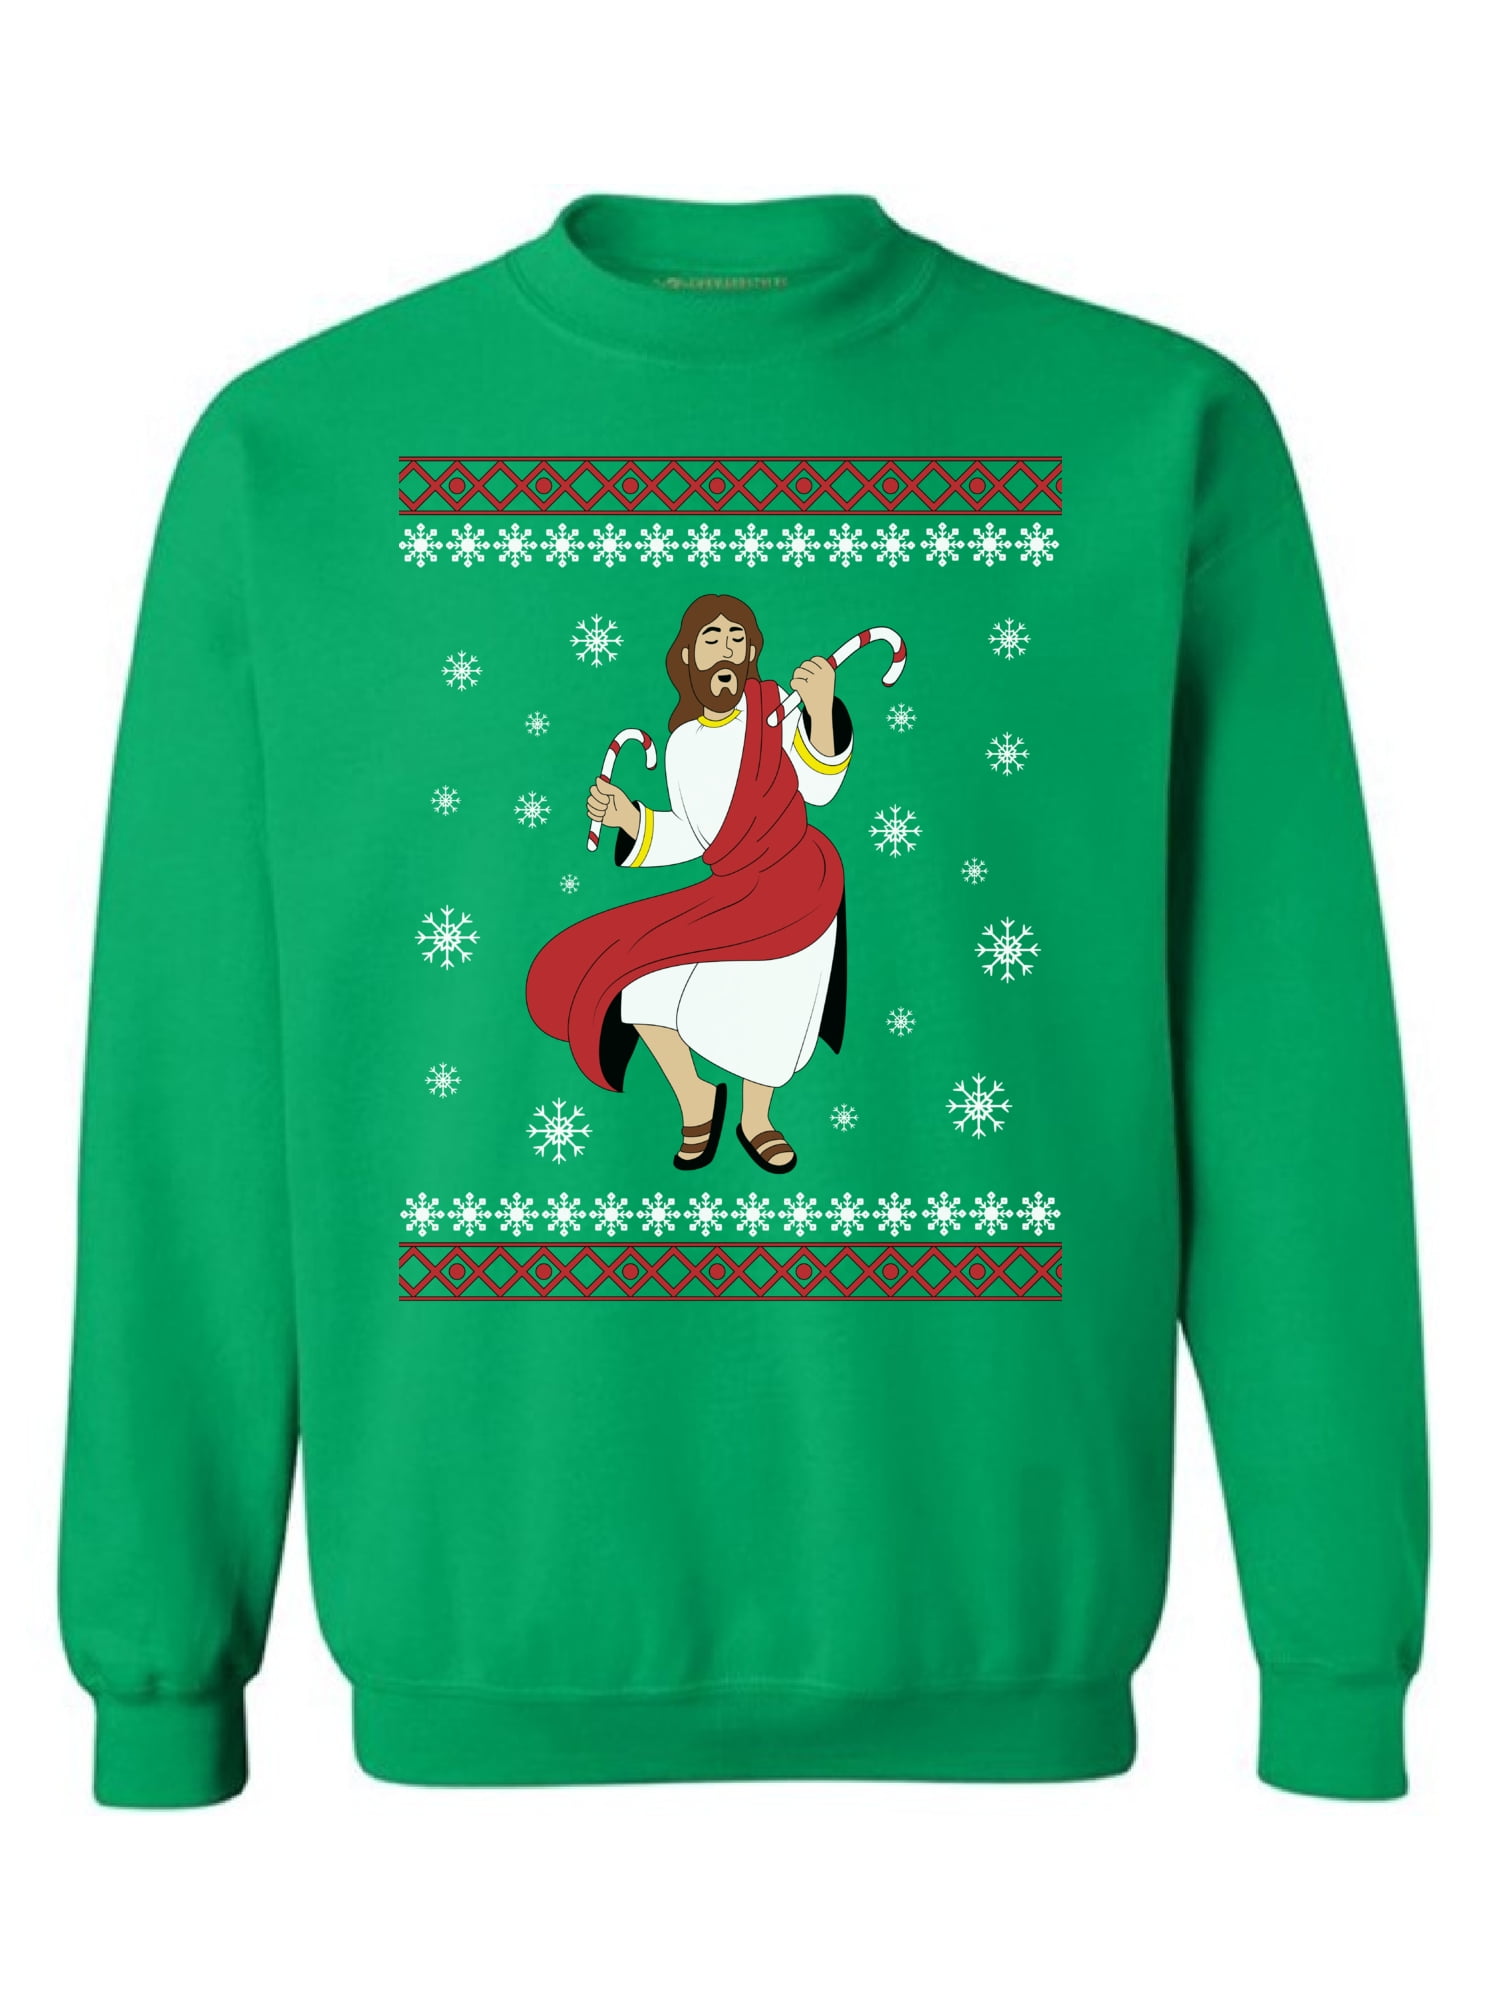 unicorn ballerina ugly christmas sweater funny christmas sweater for men women holiday xmas sweatshirt for christmas party